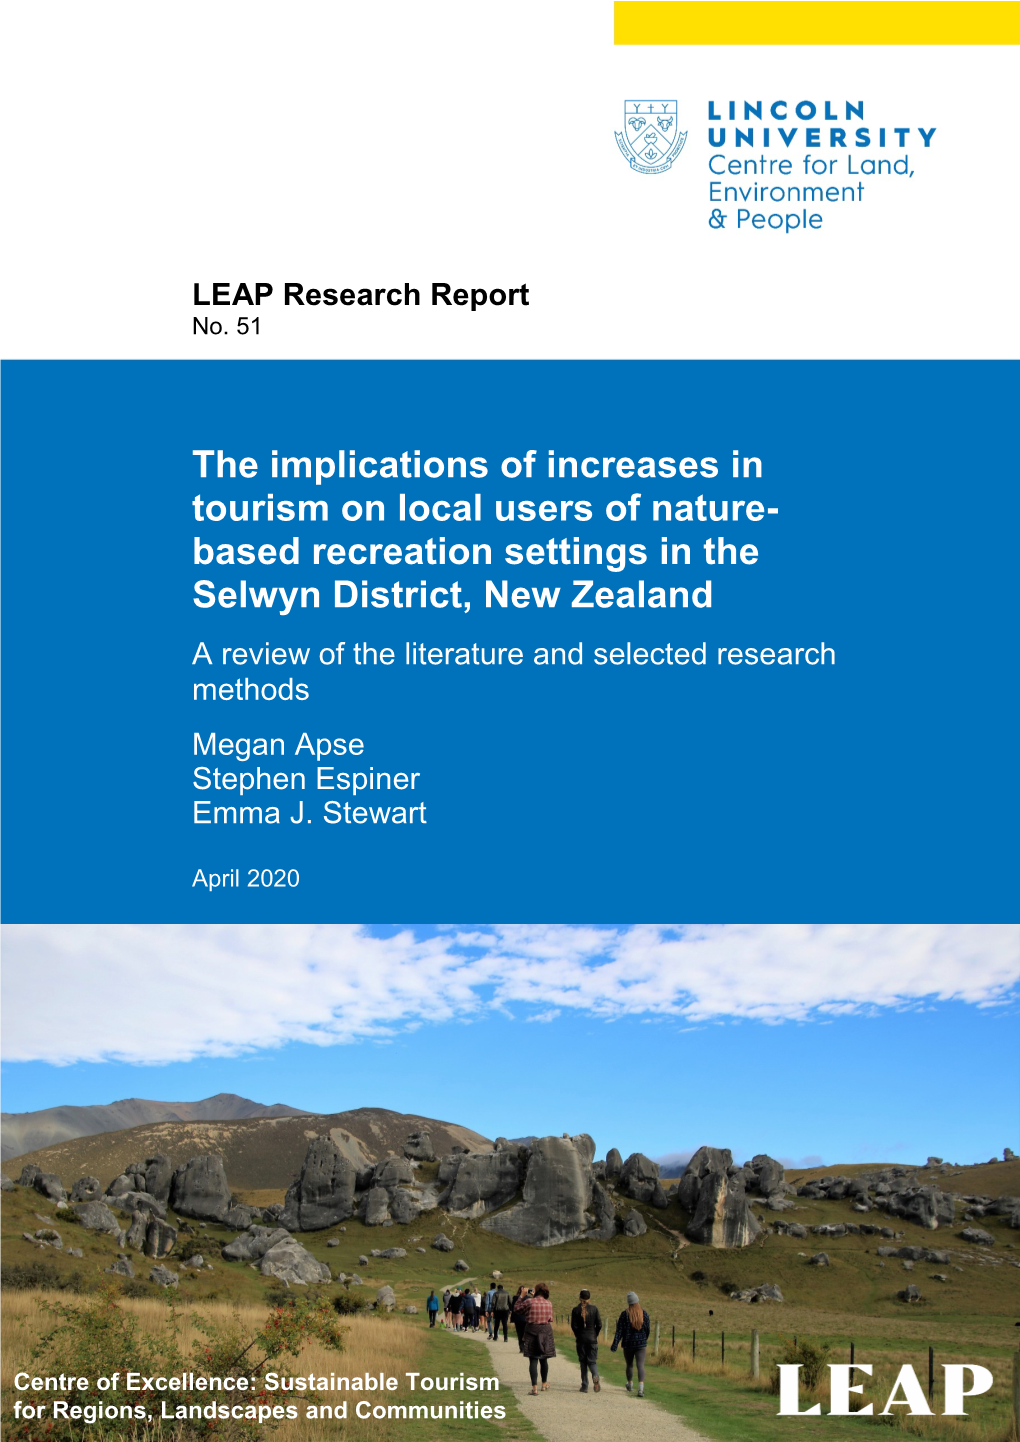 Based Recreation Settings in the Selwyn District, New Zealand a Review of the Literature and Selected Research Methods Megan Apse Stephen Espiner Emma J